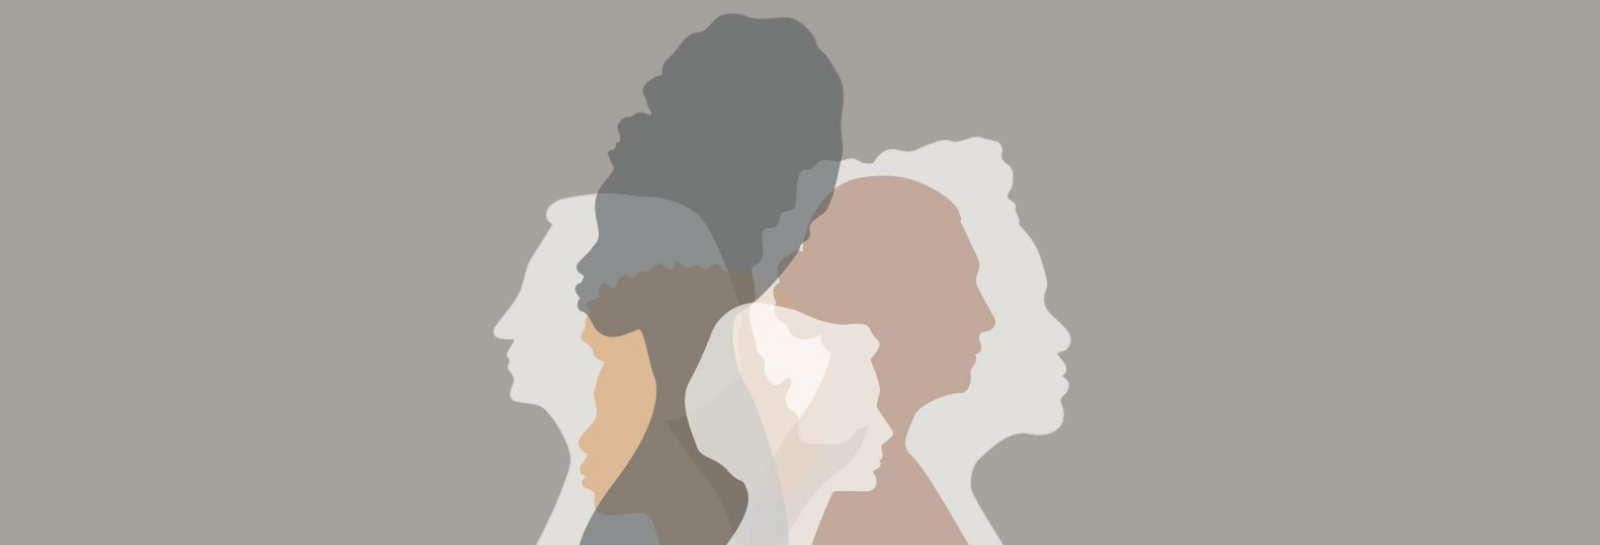 women of color  banner image